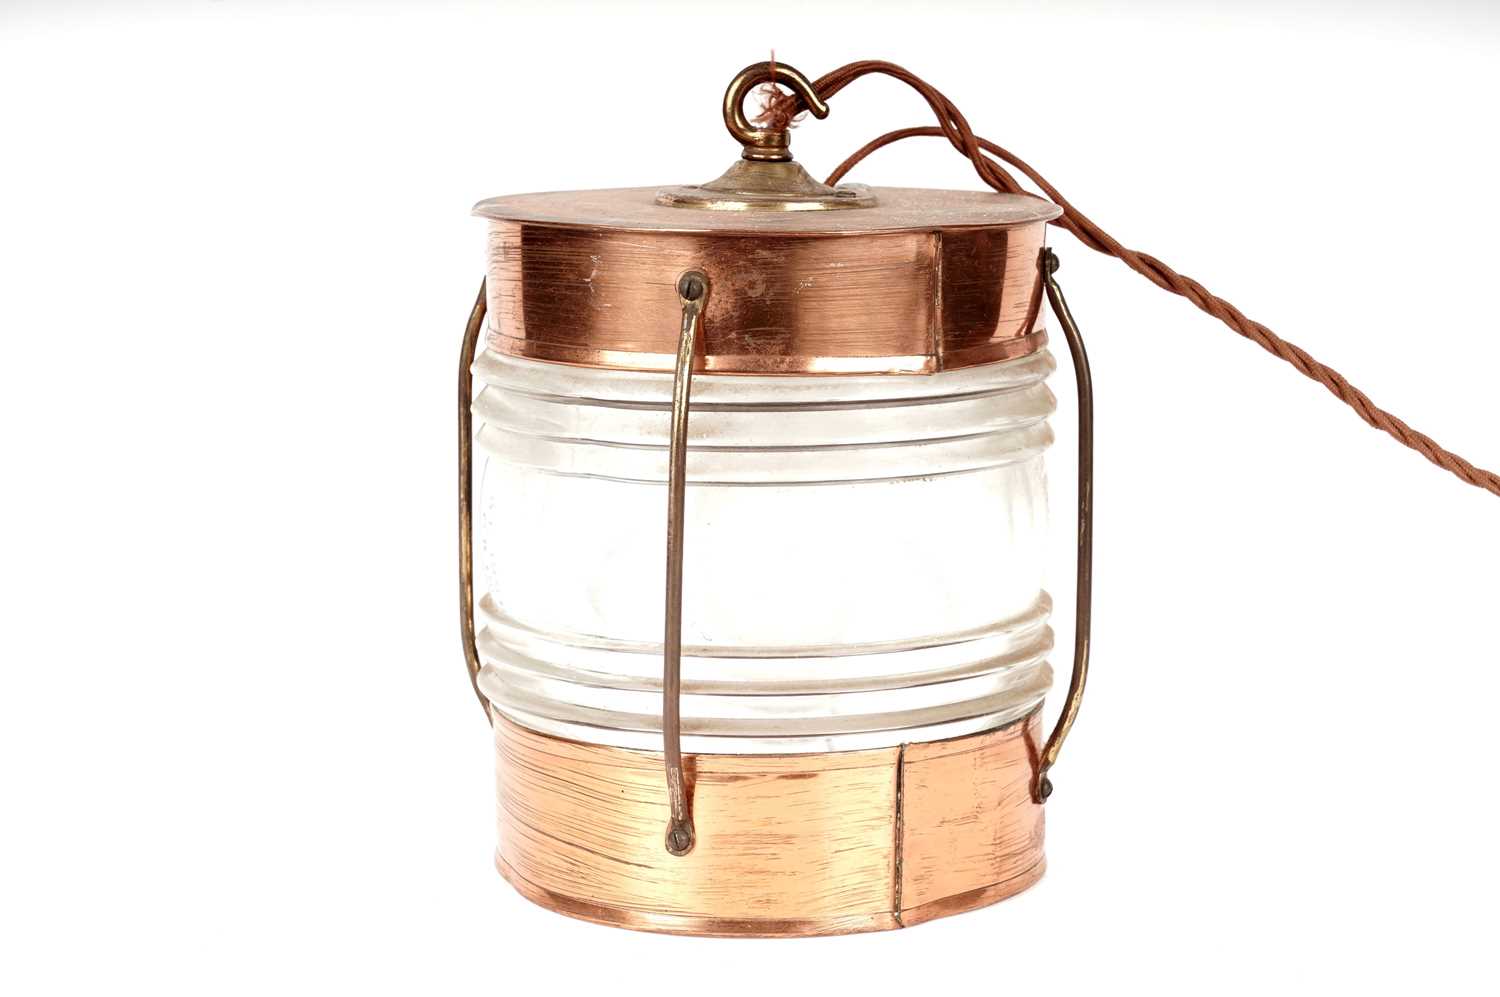 Lot 45 - A copper and brass ships lantern, converted into a ceiling or hanging light